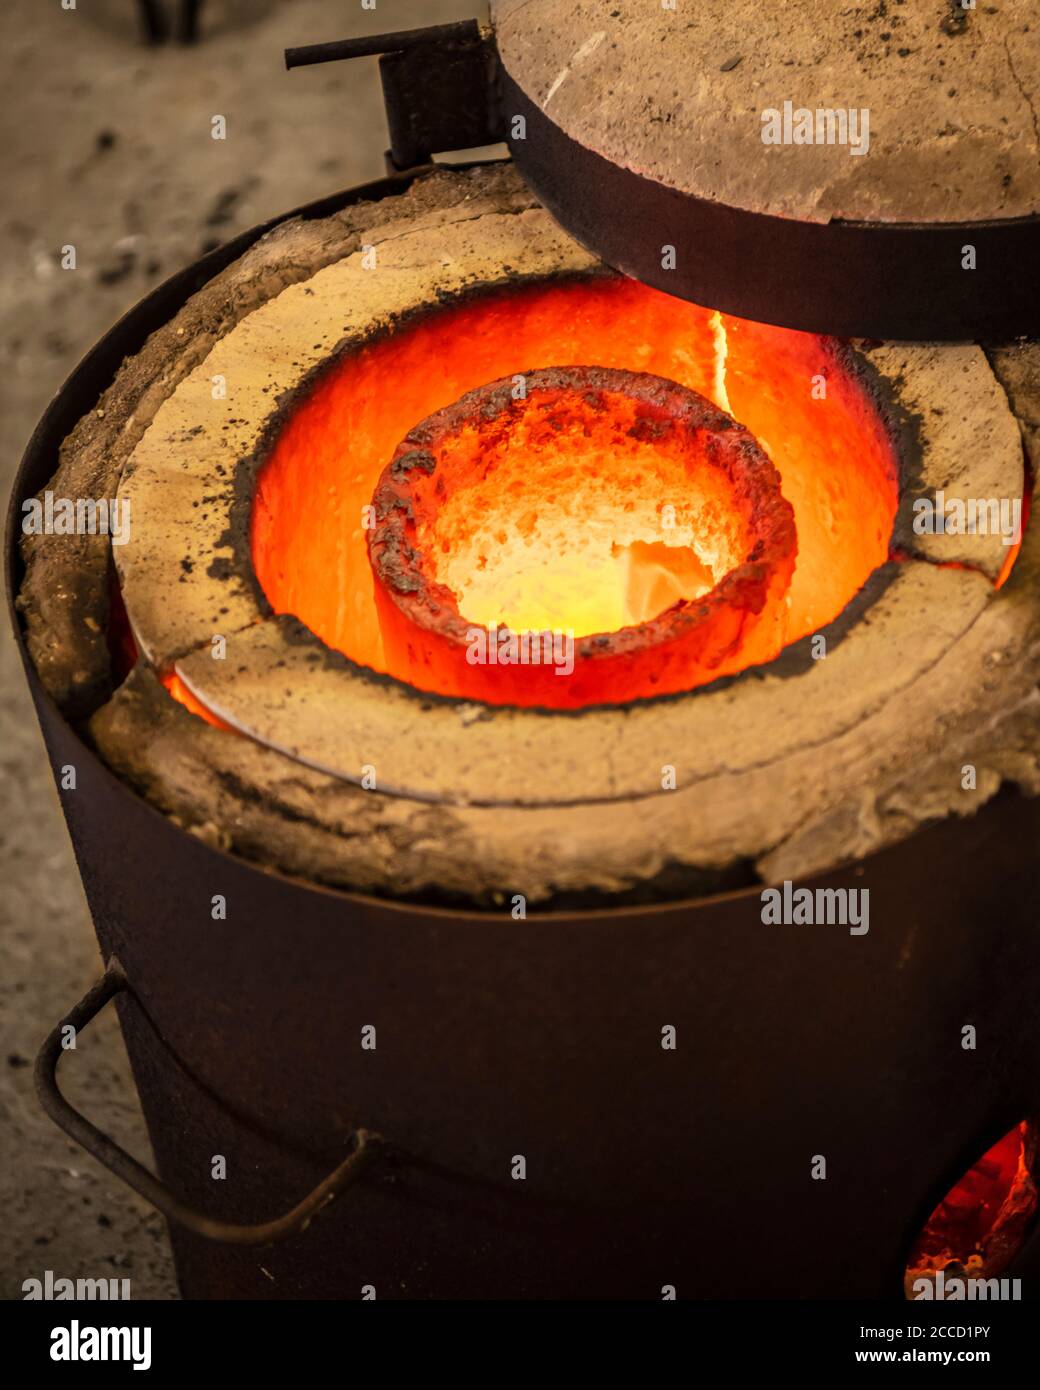 Casting the Bronze in small foundry. Sequence of images shows completely casting process from melting ingots to breaking ceramic shell of a sculpture. Stock Photo